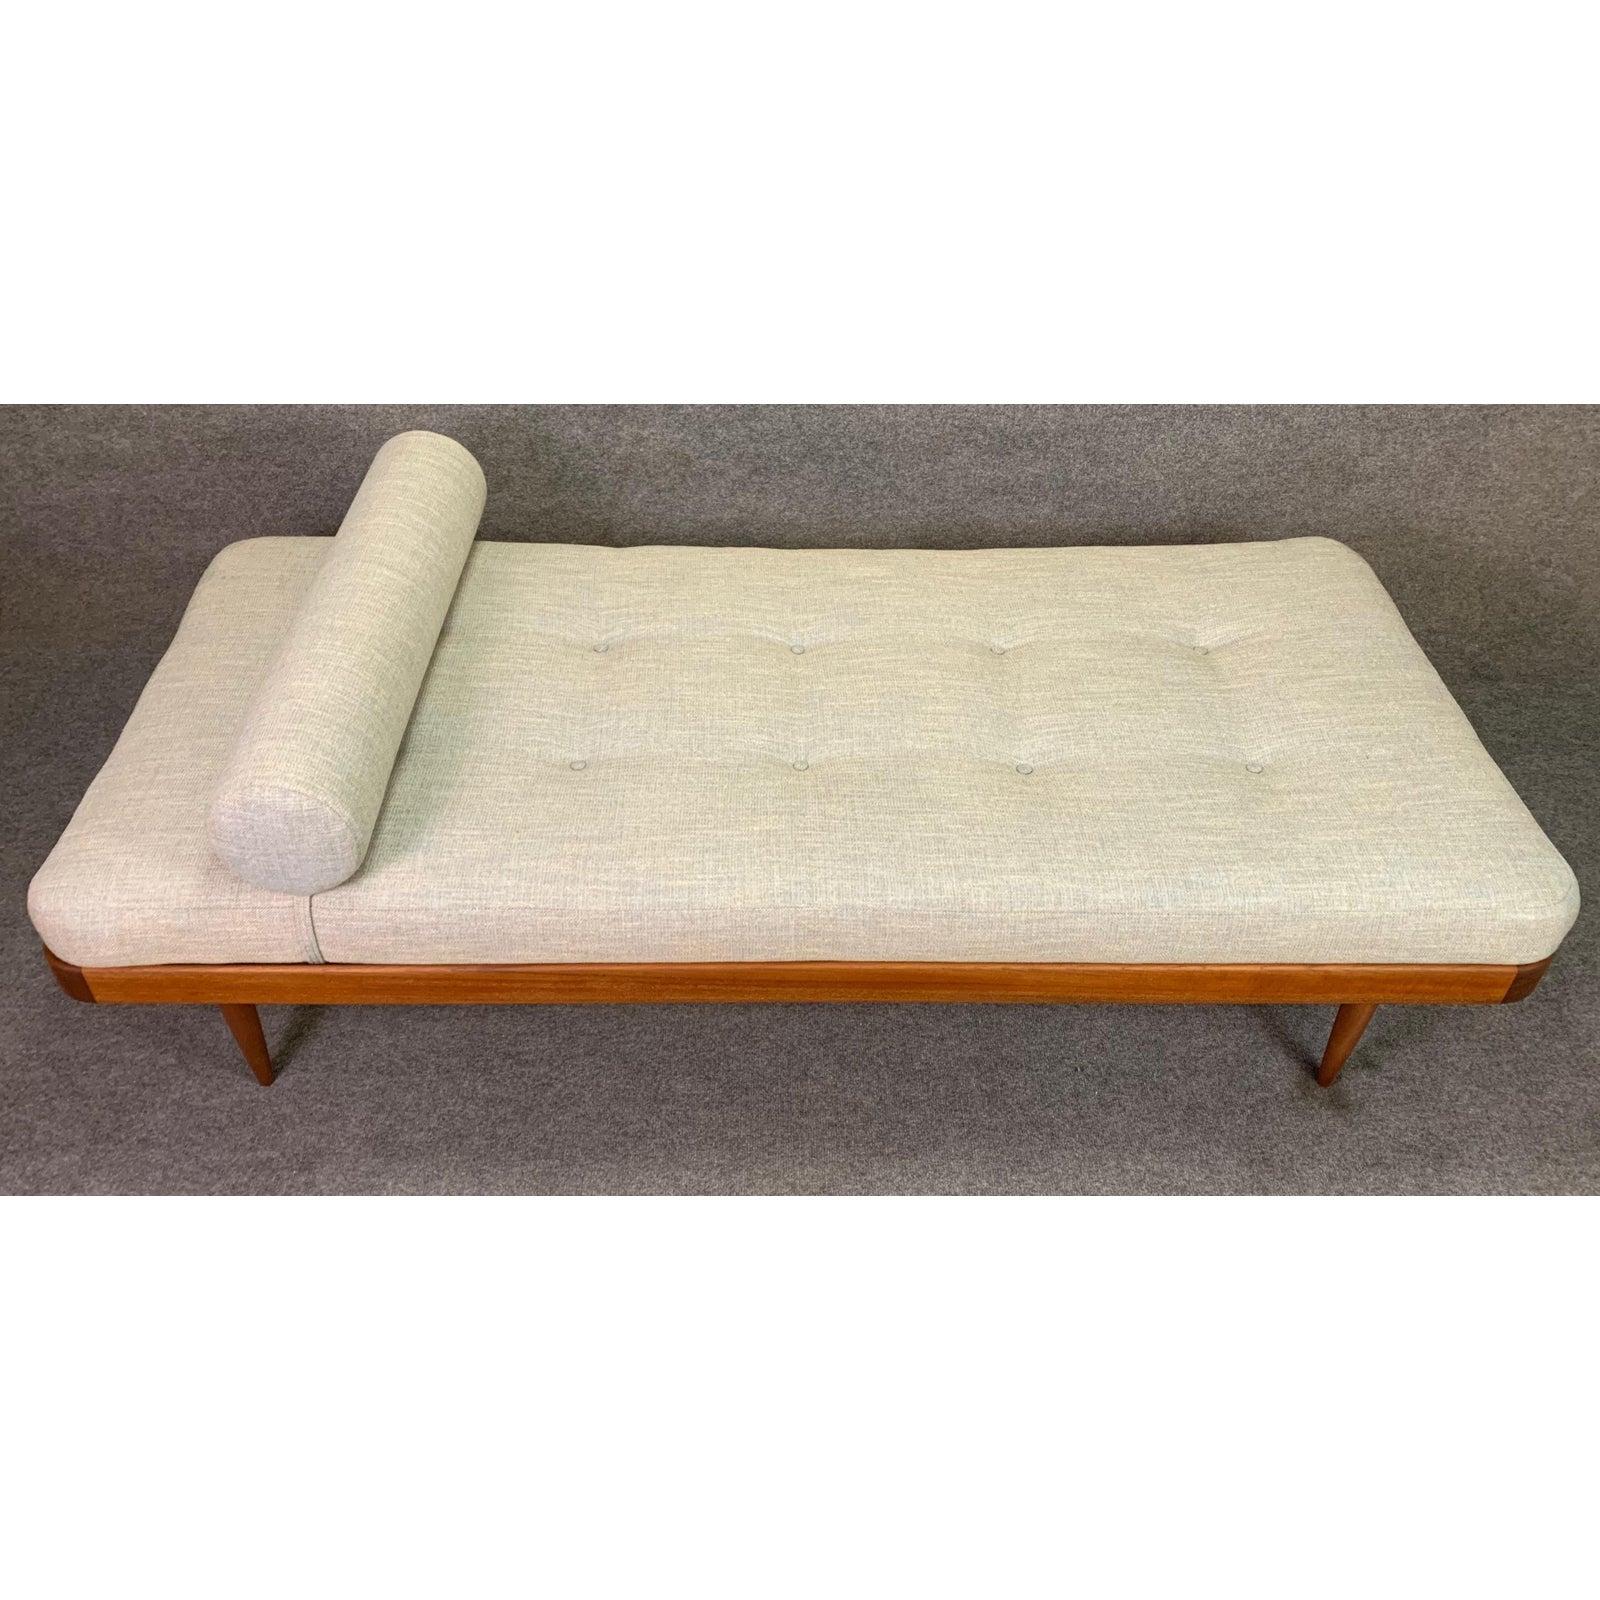 Here’s a beautiful Scandinavian Modern daybed with a teak frame that was recently imported from Denmark to California before its restoration. This lovely and comfortable piece features a solid teak frame with solid wood slats and legs and a brand